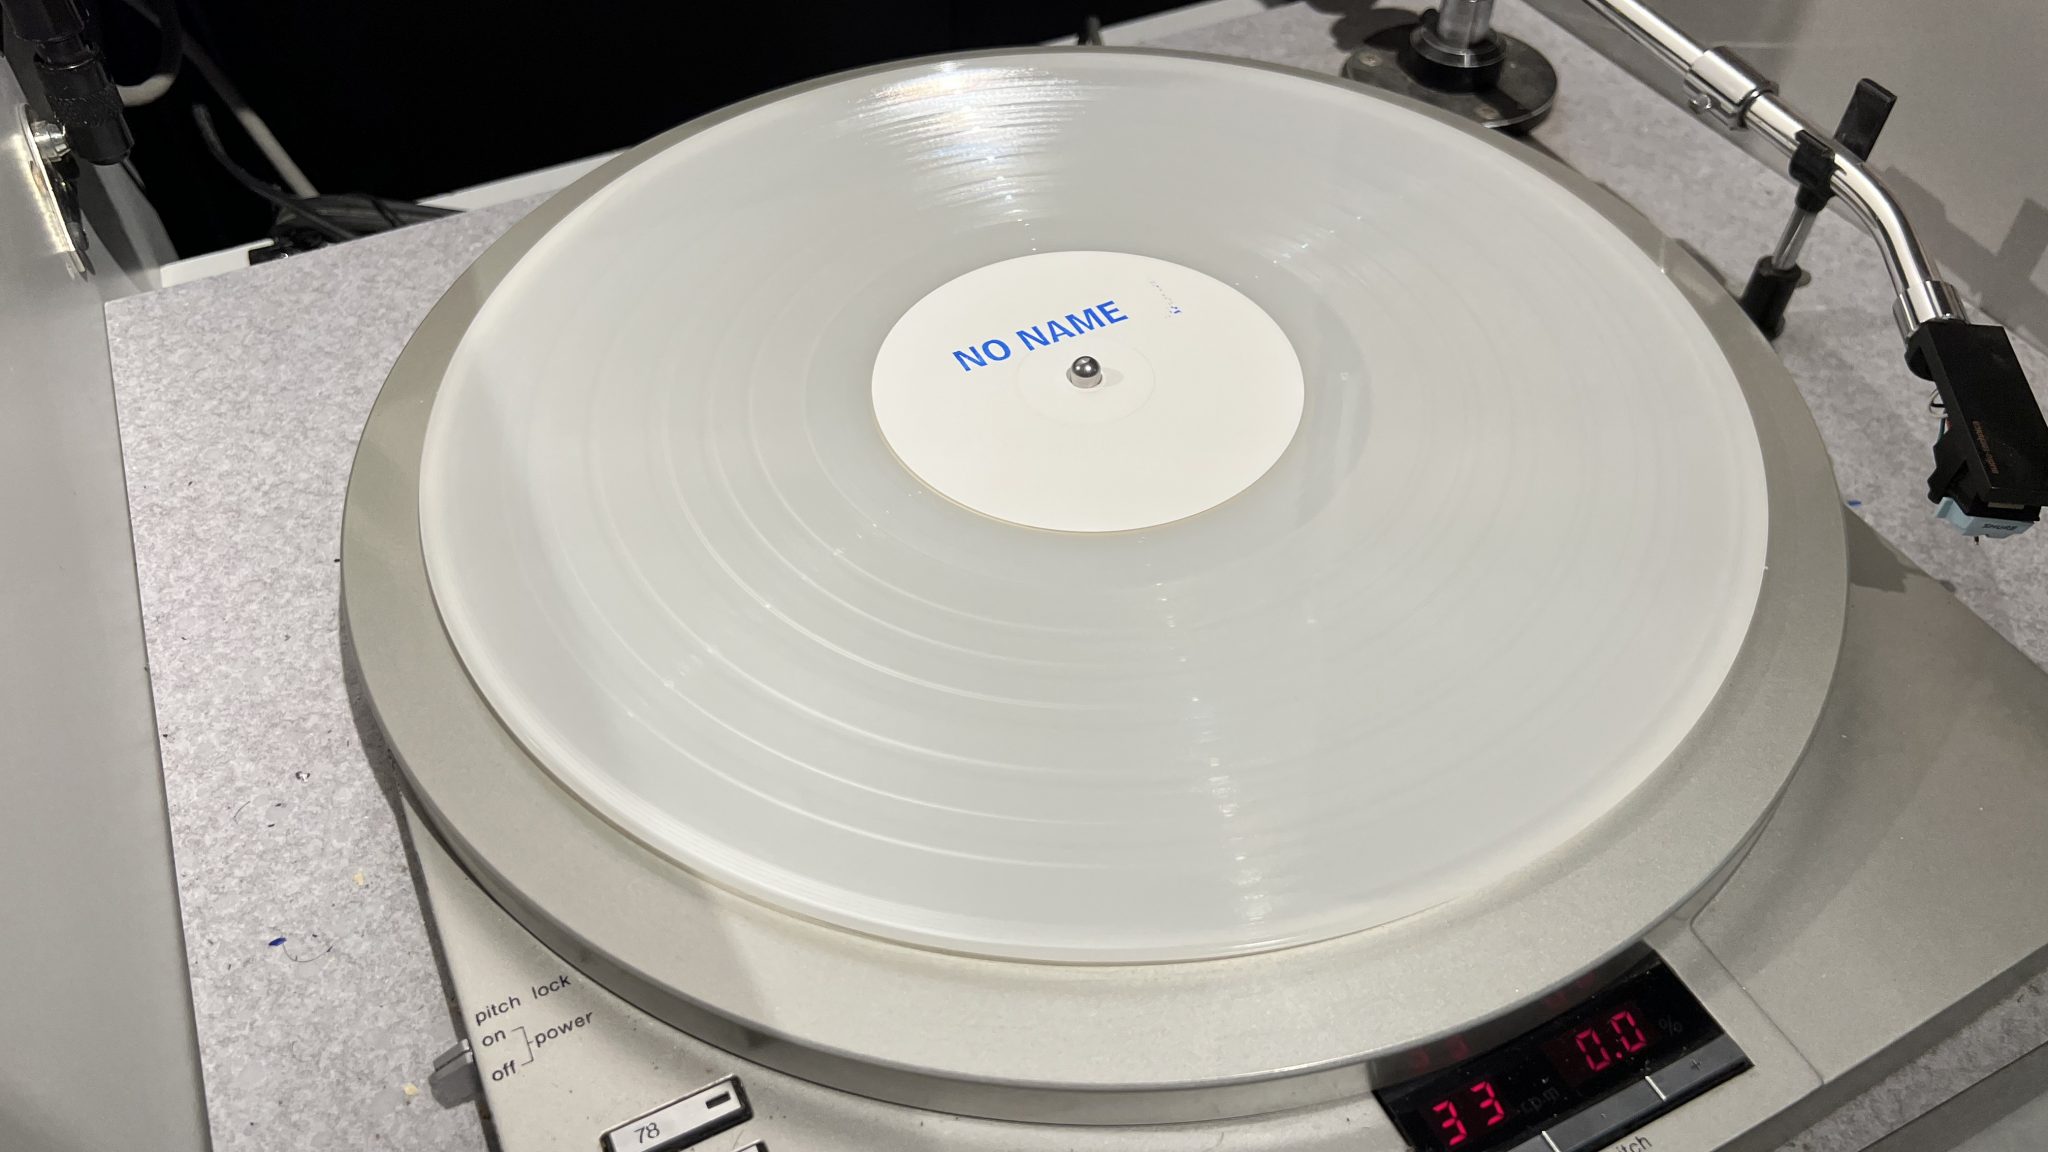 White vinyl record that says "no name" in blue letttering.